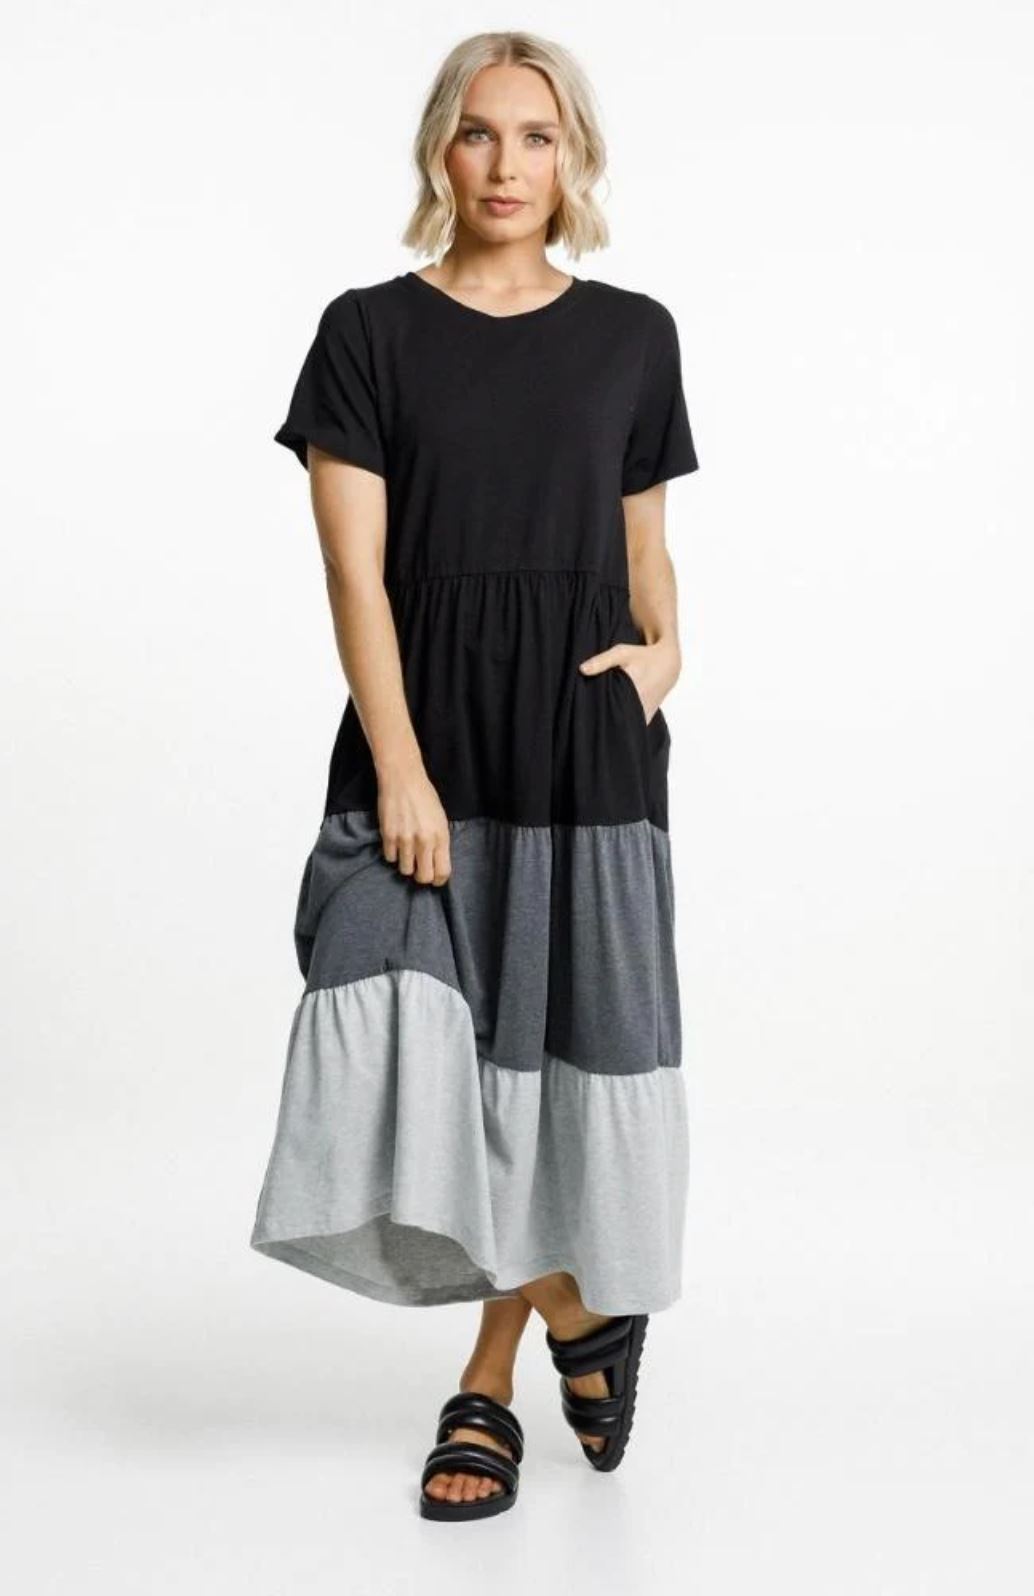 Home Lee Kendall Dress - Black/Charcoal/Grey Spice